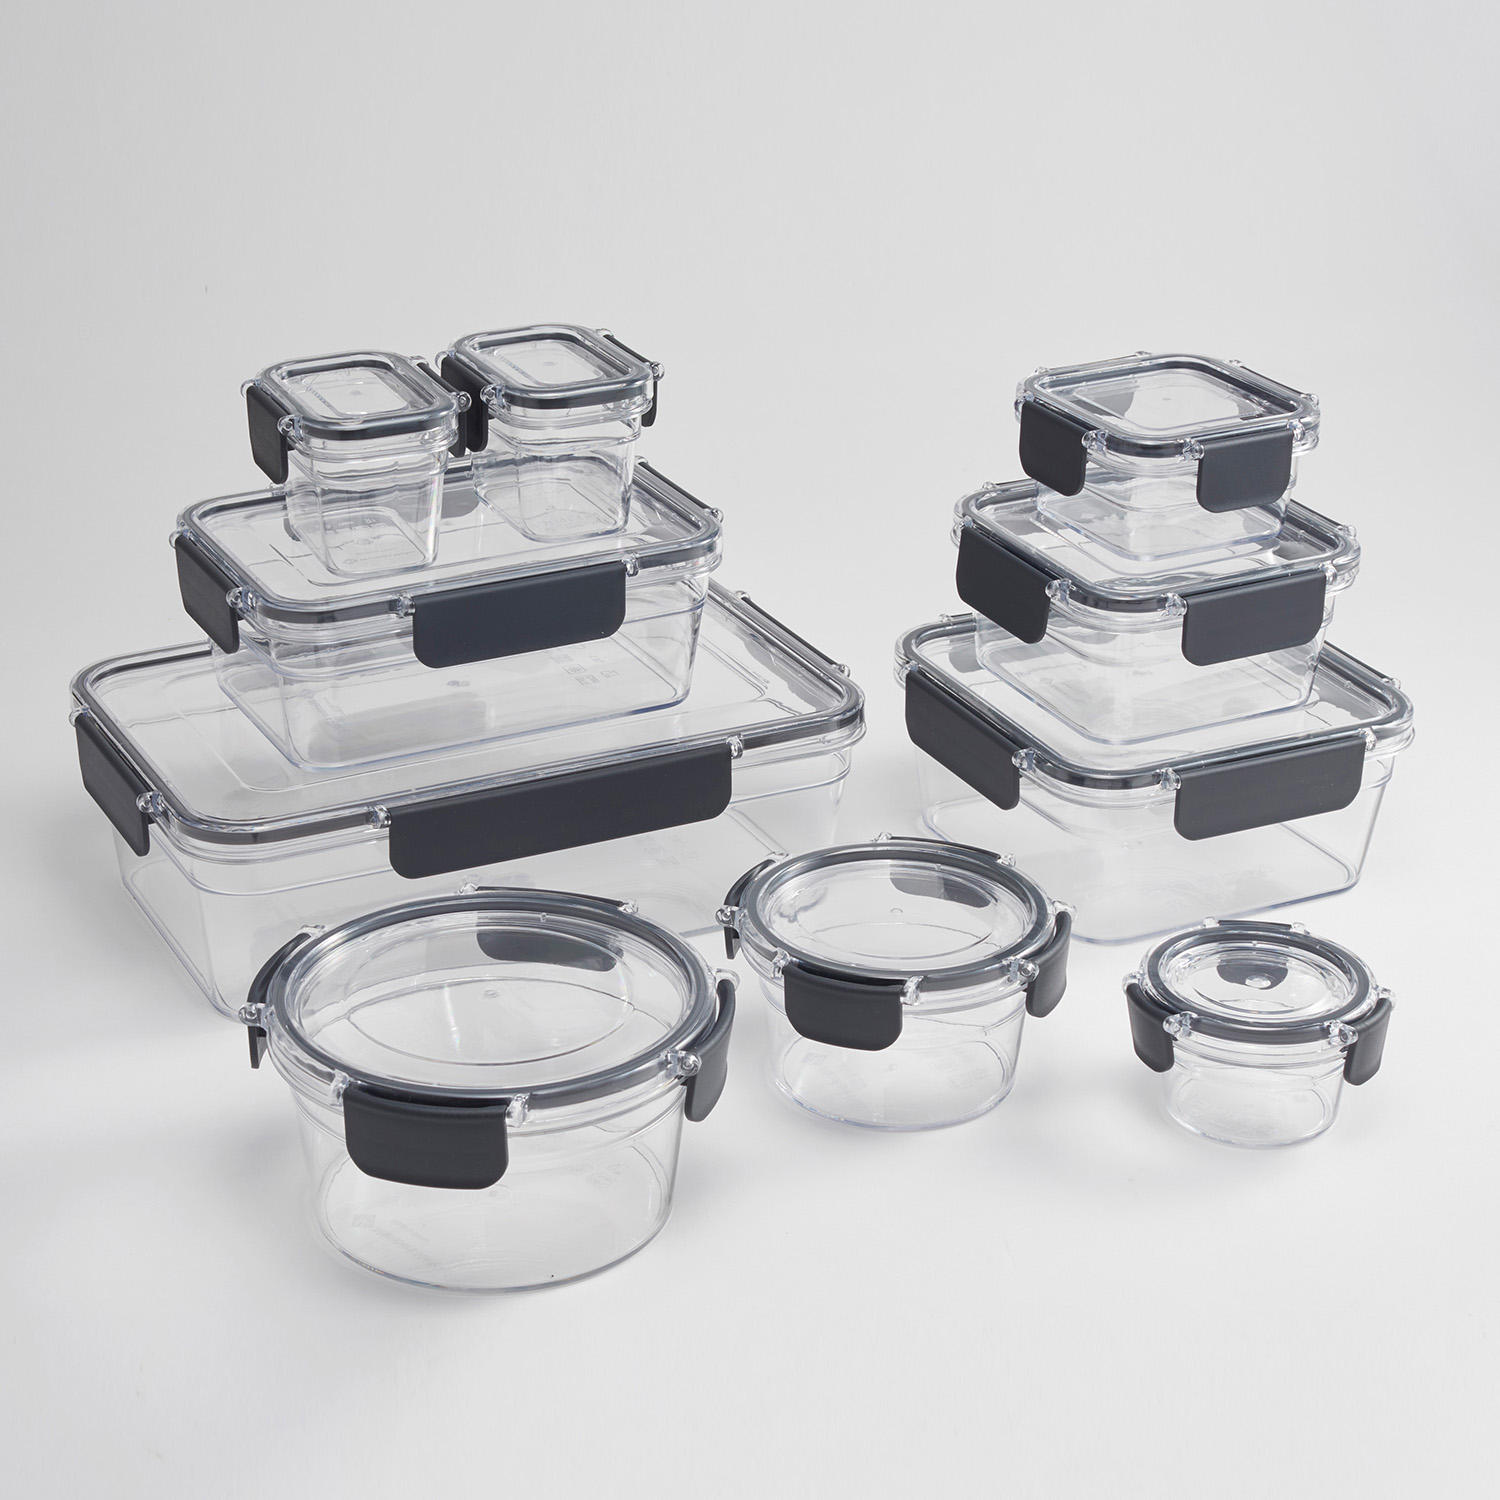 20-Pc Member's Mark Tritan Food Storage Container Set $14 + Free Shipping